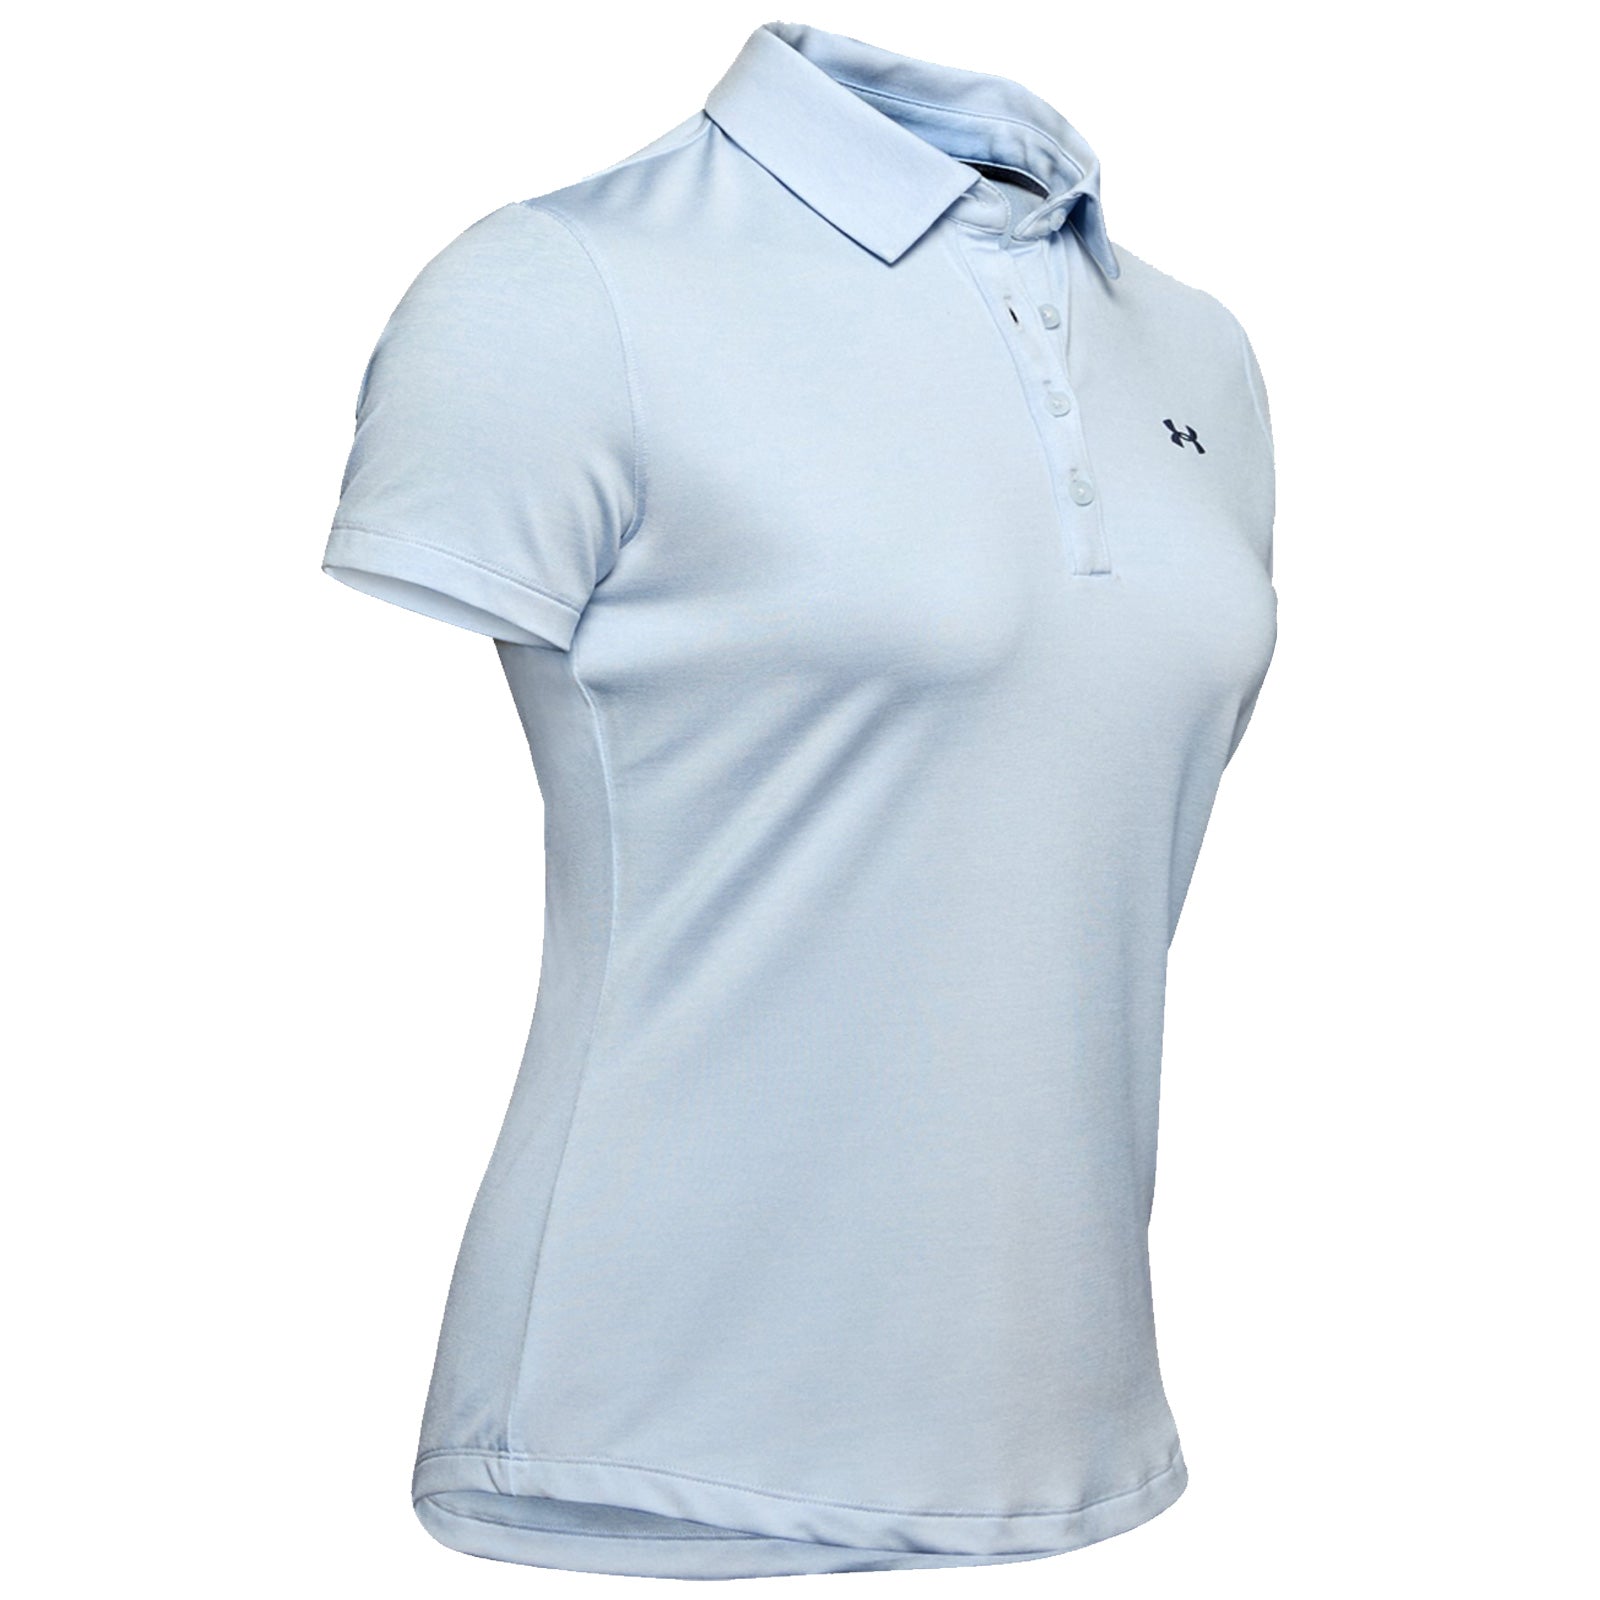 Under Armour Ladies Zinger 2.0 Polo Shirt